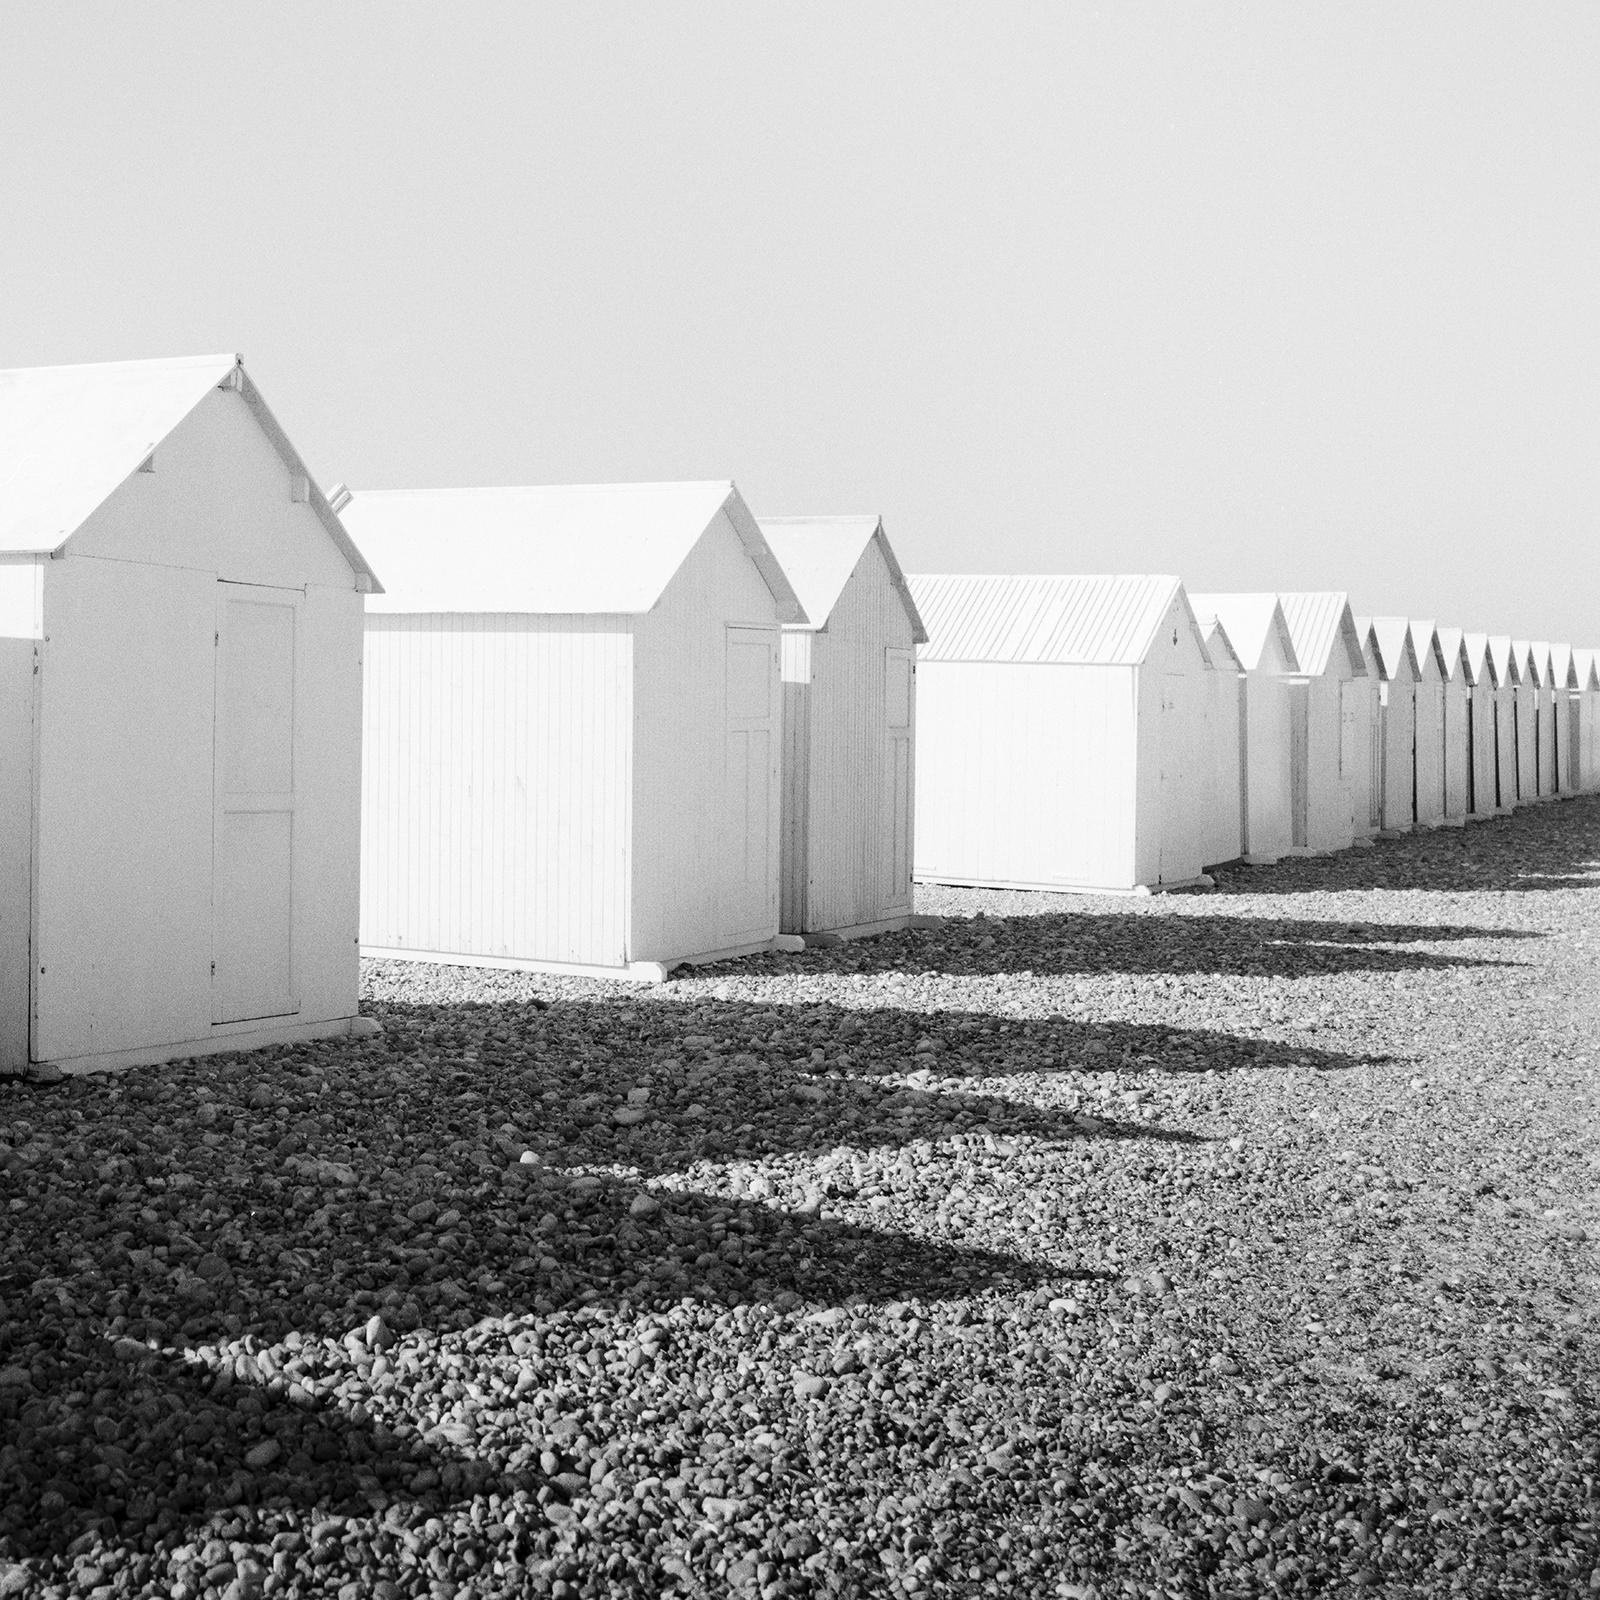 Row of Beach Huts, rocky beach, black and white, fine art, landscape photography For Sale 4